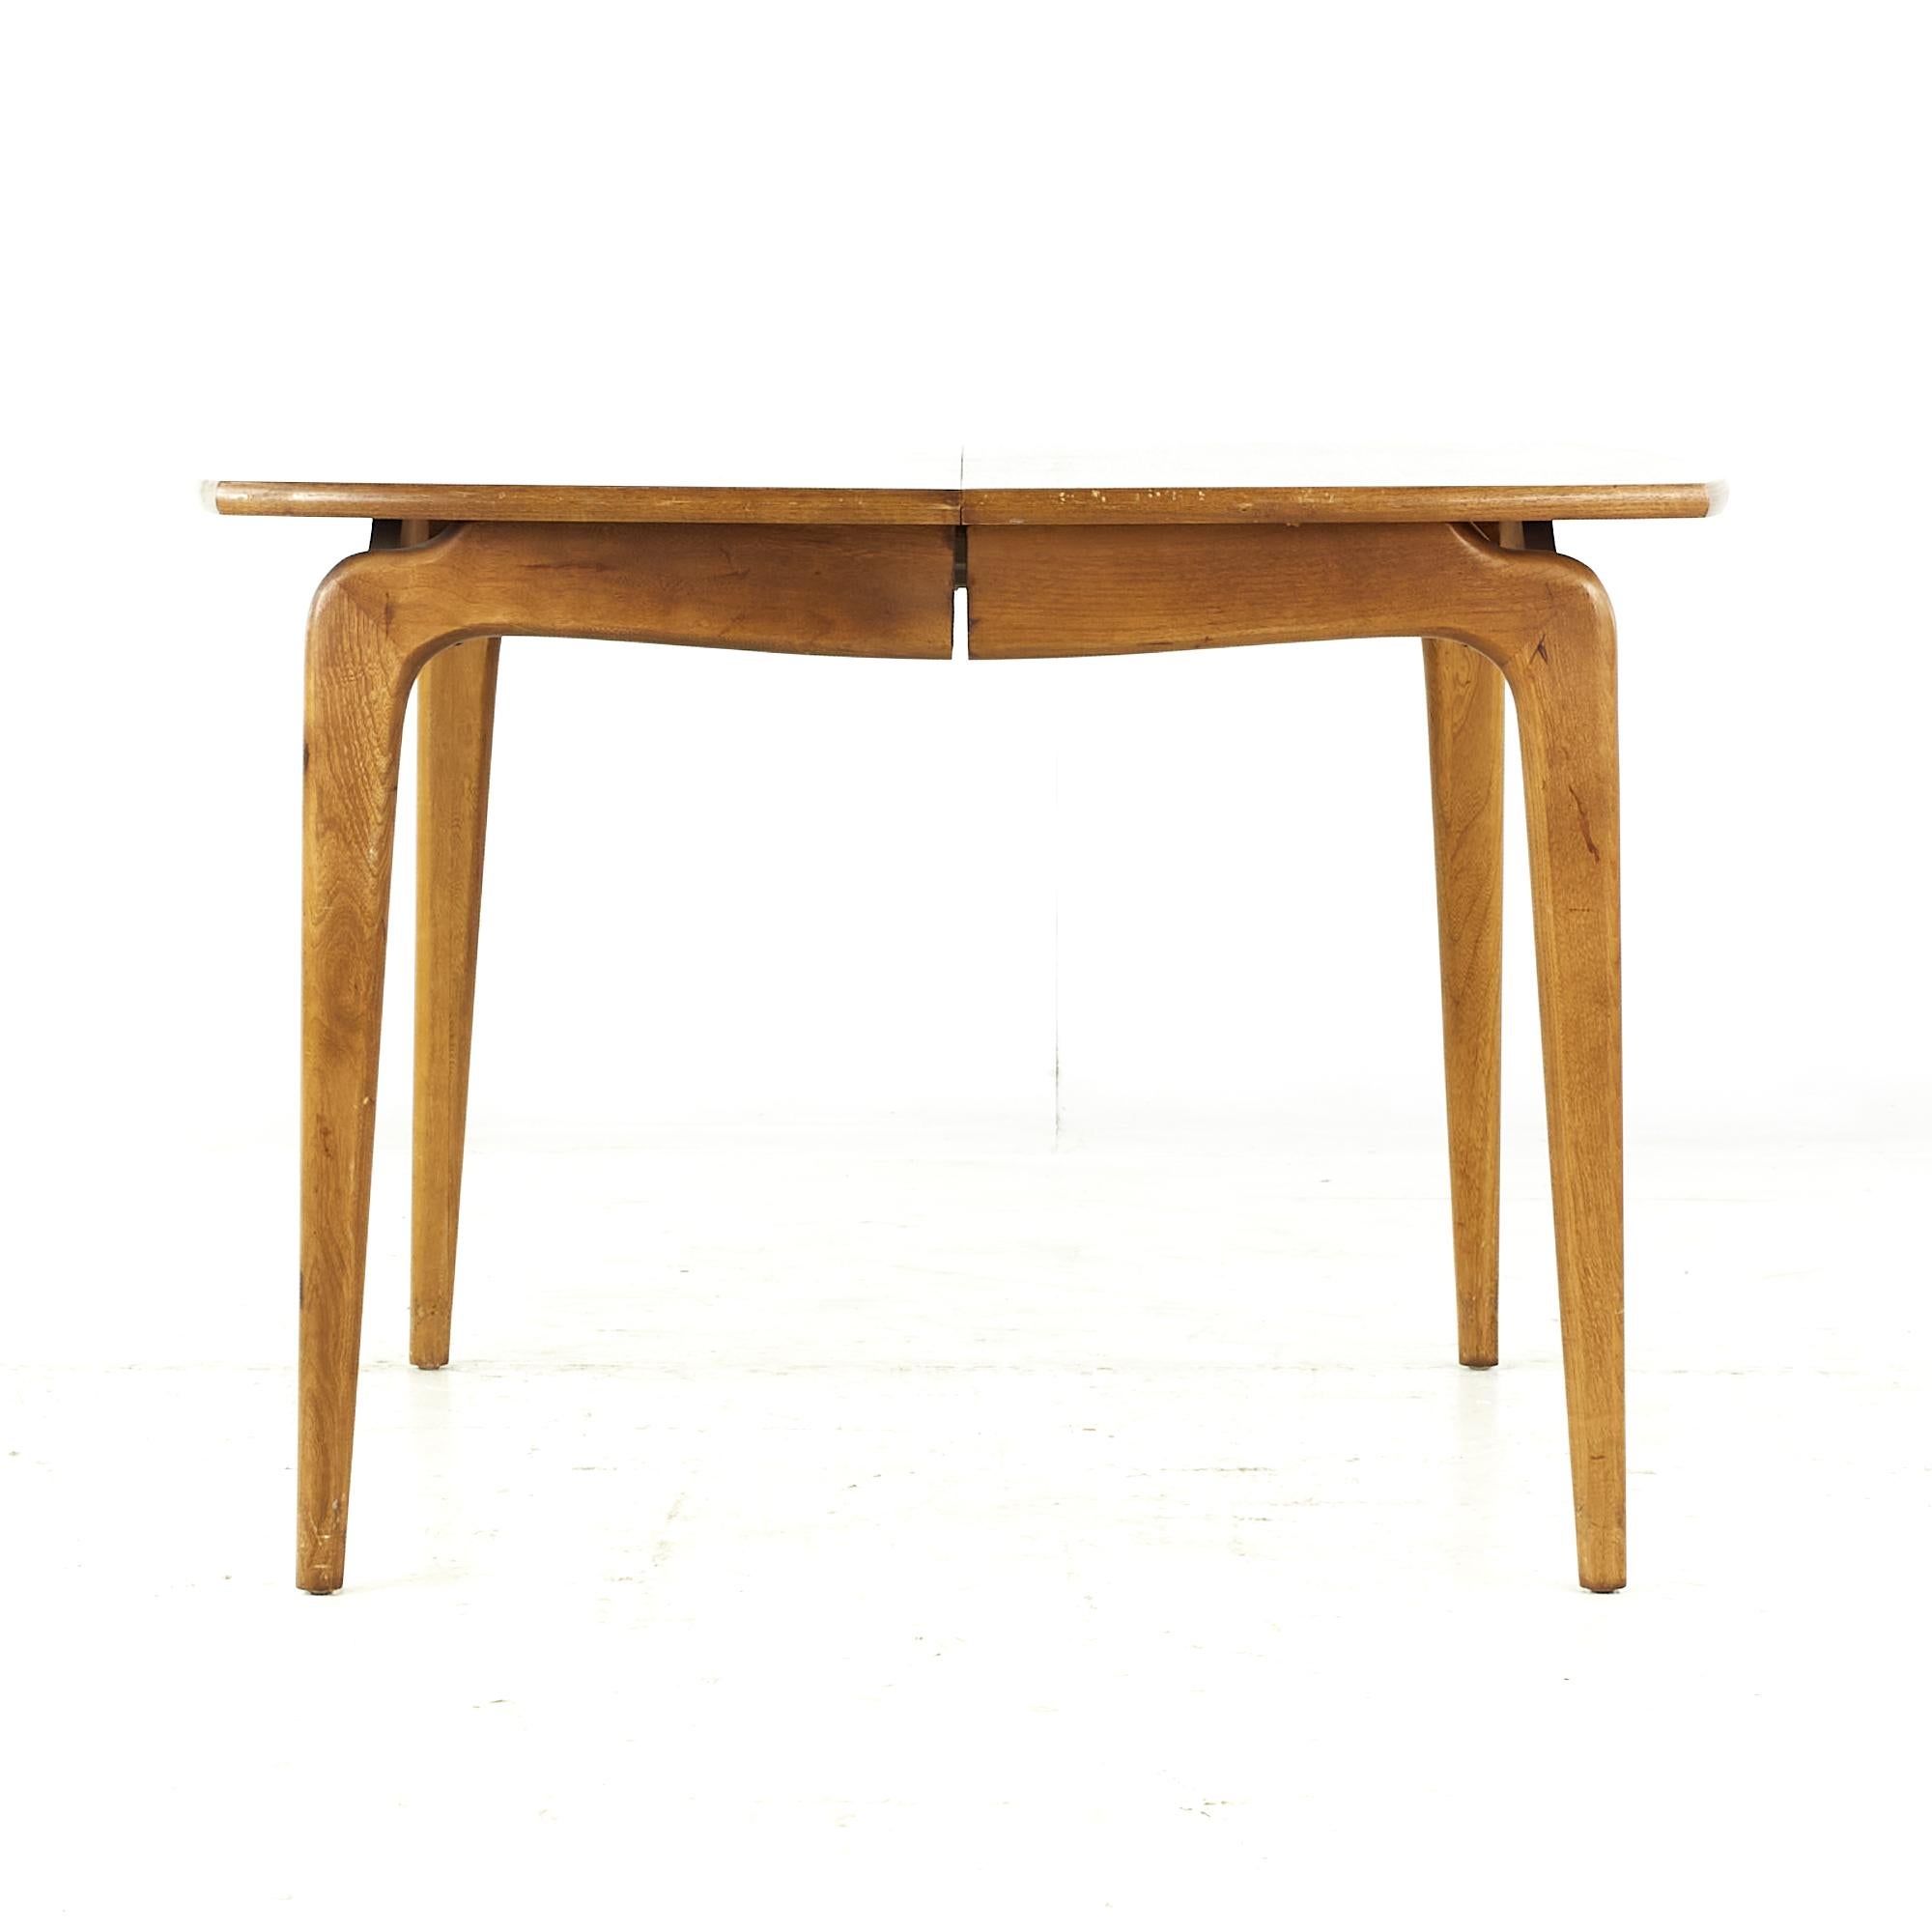 Lane perception midcentury walnut expanding dining table with 2 leaves.

This table measures: 42 wide x 42 deep x 29 high, with a chair clearance of 25.25 inches, each leaf measures 18 inches wide, making a maximum table width of 78 inches when